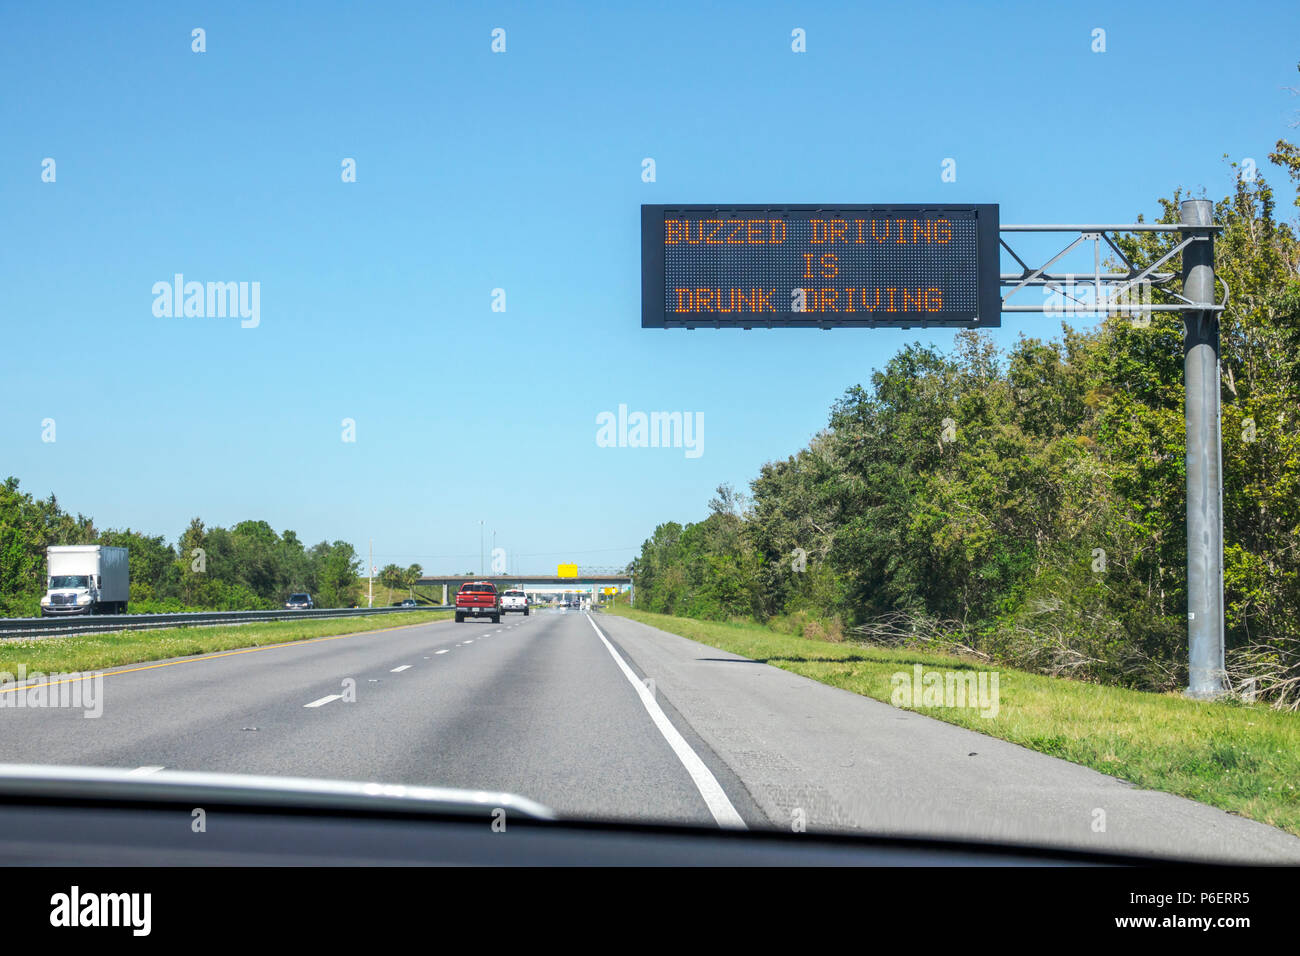 Fort Ft. Lauderdale Florida,Florida Turnpike toll road,electronic message board sign,drunk driving,FL171028016 Stock Photo